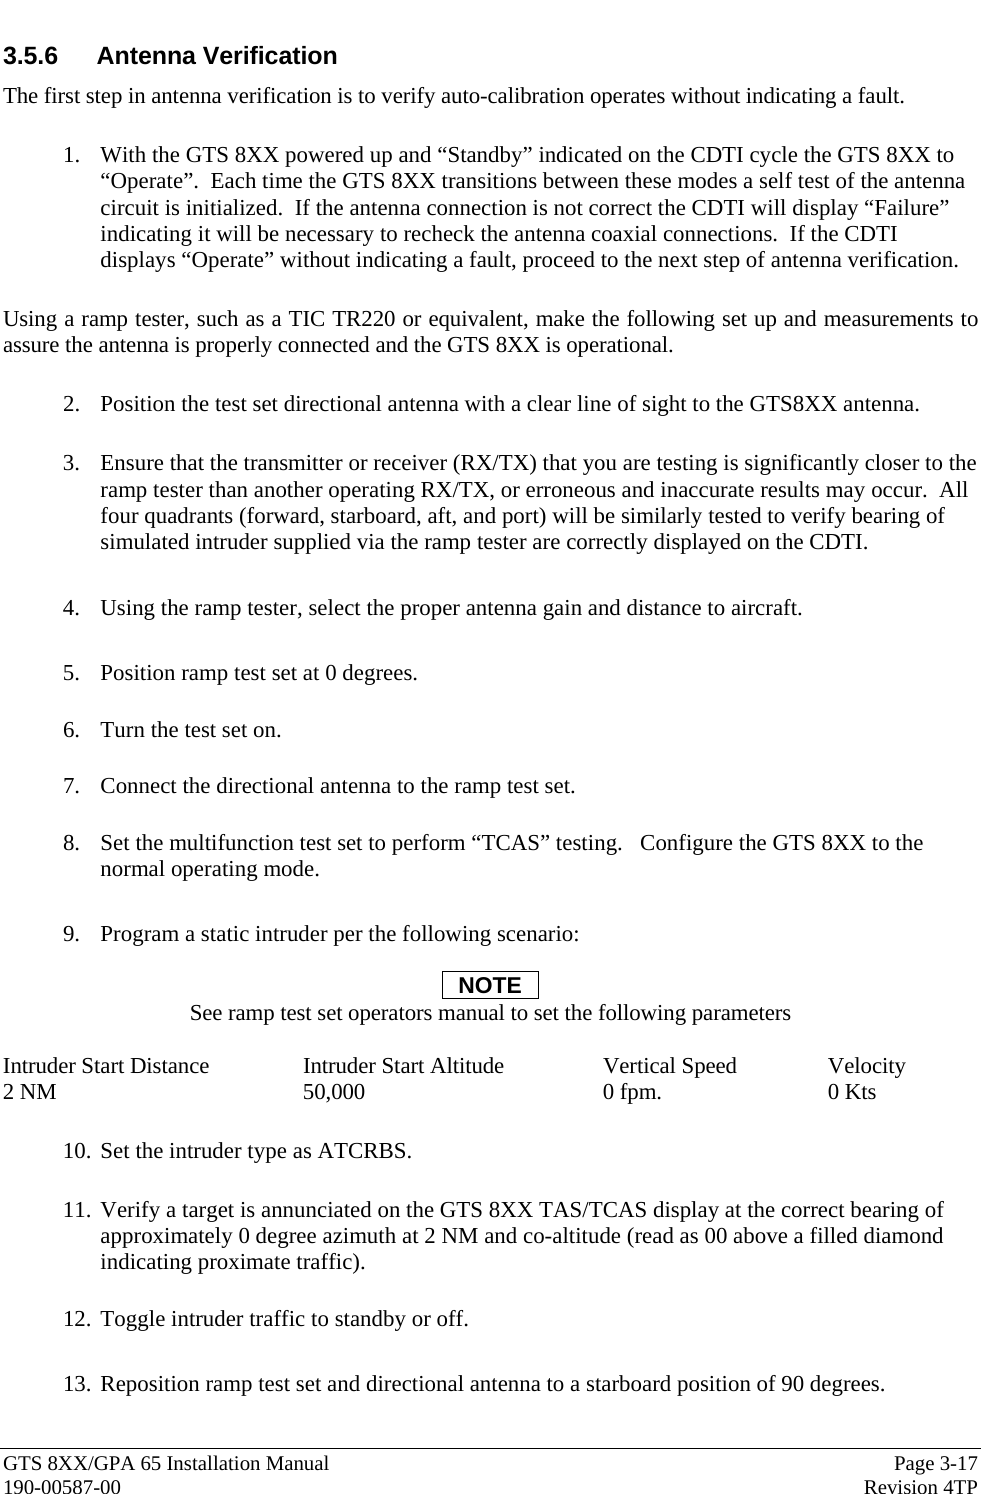  GTS 8XX/GPA 65 Installation Manual  Page 3-17 190-00587-00  Revision 4TP 3.5.6 Antenna Verification The first step in antenna verification is to verify auto-calibration operates without indicating a fault.    1. With the GTS 8XX powered up and “Standby” indicated on the CDTI cycle the GTS 8XX to “Operate”.  Each time the GTS 8XX transitions between these modes a self test of the antenna circuit is initialized.  If the antenna connection is not correct the CDTI will display “Failure” indicating it will be necessary to recheck the antenna coaxial connections.  If the CDTI displays “Operate” without indicating a fault, proceed to the next step of antenna verification.  Using a ramp tester, such as a TIC TR220 or equivalent, make the following set up and measurements to assure the antenna is properly connected and the GTS 8XX is operational.    2. Position the test set directional antenna with a clear line of sight to the GTS8XX antenna.    3. Ensure that the transmitter or receiver (RX/TX) that you are testing is significantly closer to the ramp tester than another operating RX/TX, or erroneous and inaccurate results may occur.  All four quadrants (forward, starboard, aft, and port) will be similarly tested to verify bearing of simulated intruder supplied via the ramp tester are correctly displayed on the CDTI.    4. Using the ramp tester, select the proper antenna gain and distance to aircraft.   5. Position ramp test set at 0 degrees.    6. Turn the test set on.    7. Connect the directional antenna to the ramp test set.      8. Set the multifunction test set to perform “TCAS” testing.   Configure the GTS 8XX to the normal operating mode.  9. Program a static intruder per the following scenario:  NOTE See ramp test set operators manual to set the following parameters  Intruder Start Distance    Intruder Start Altitude    Vertical Speed    Velocity 2 NM    50,000      0 fpm.     0 Kts  10. Set the intruder type as ATCRBS.   11. Verify a target is annunciated on the GTS 8XX TAS/TCAS display at the correct bearing of approximately 0 degree azimuth at 2 NM and co-altitude (read as 00 above a filled diamond indicating proximate traffic).    12. Toggle intruder traffic to standby or off.  13. Reposition ramp test set and directional antenna to a starboard position of 90 degrees.    